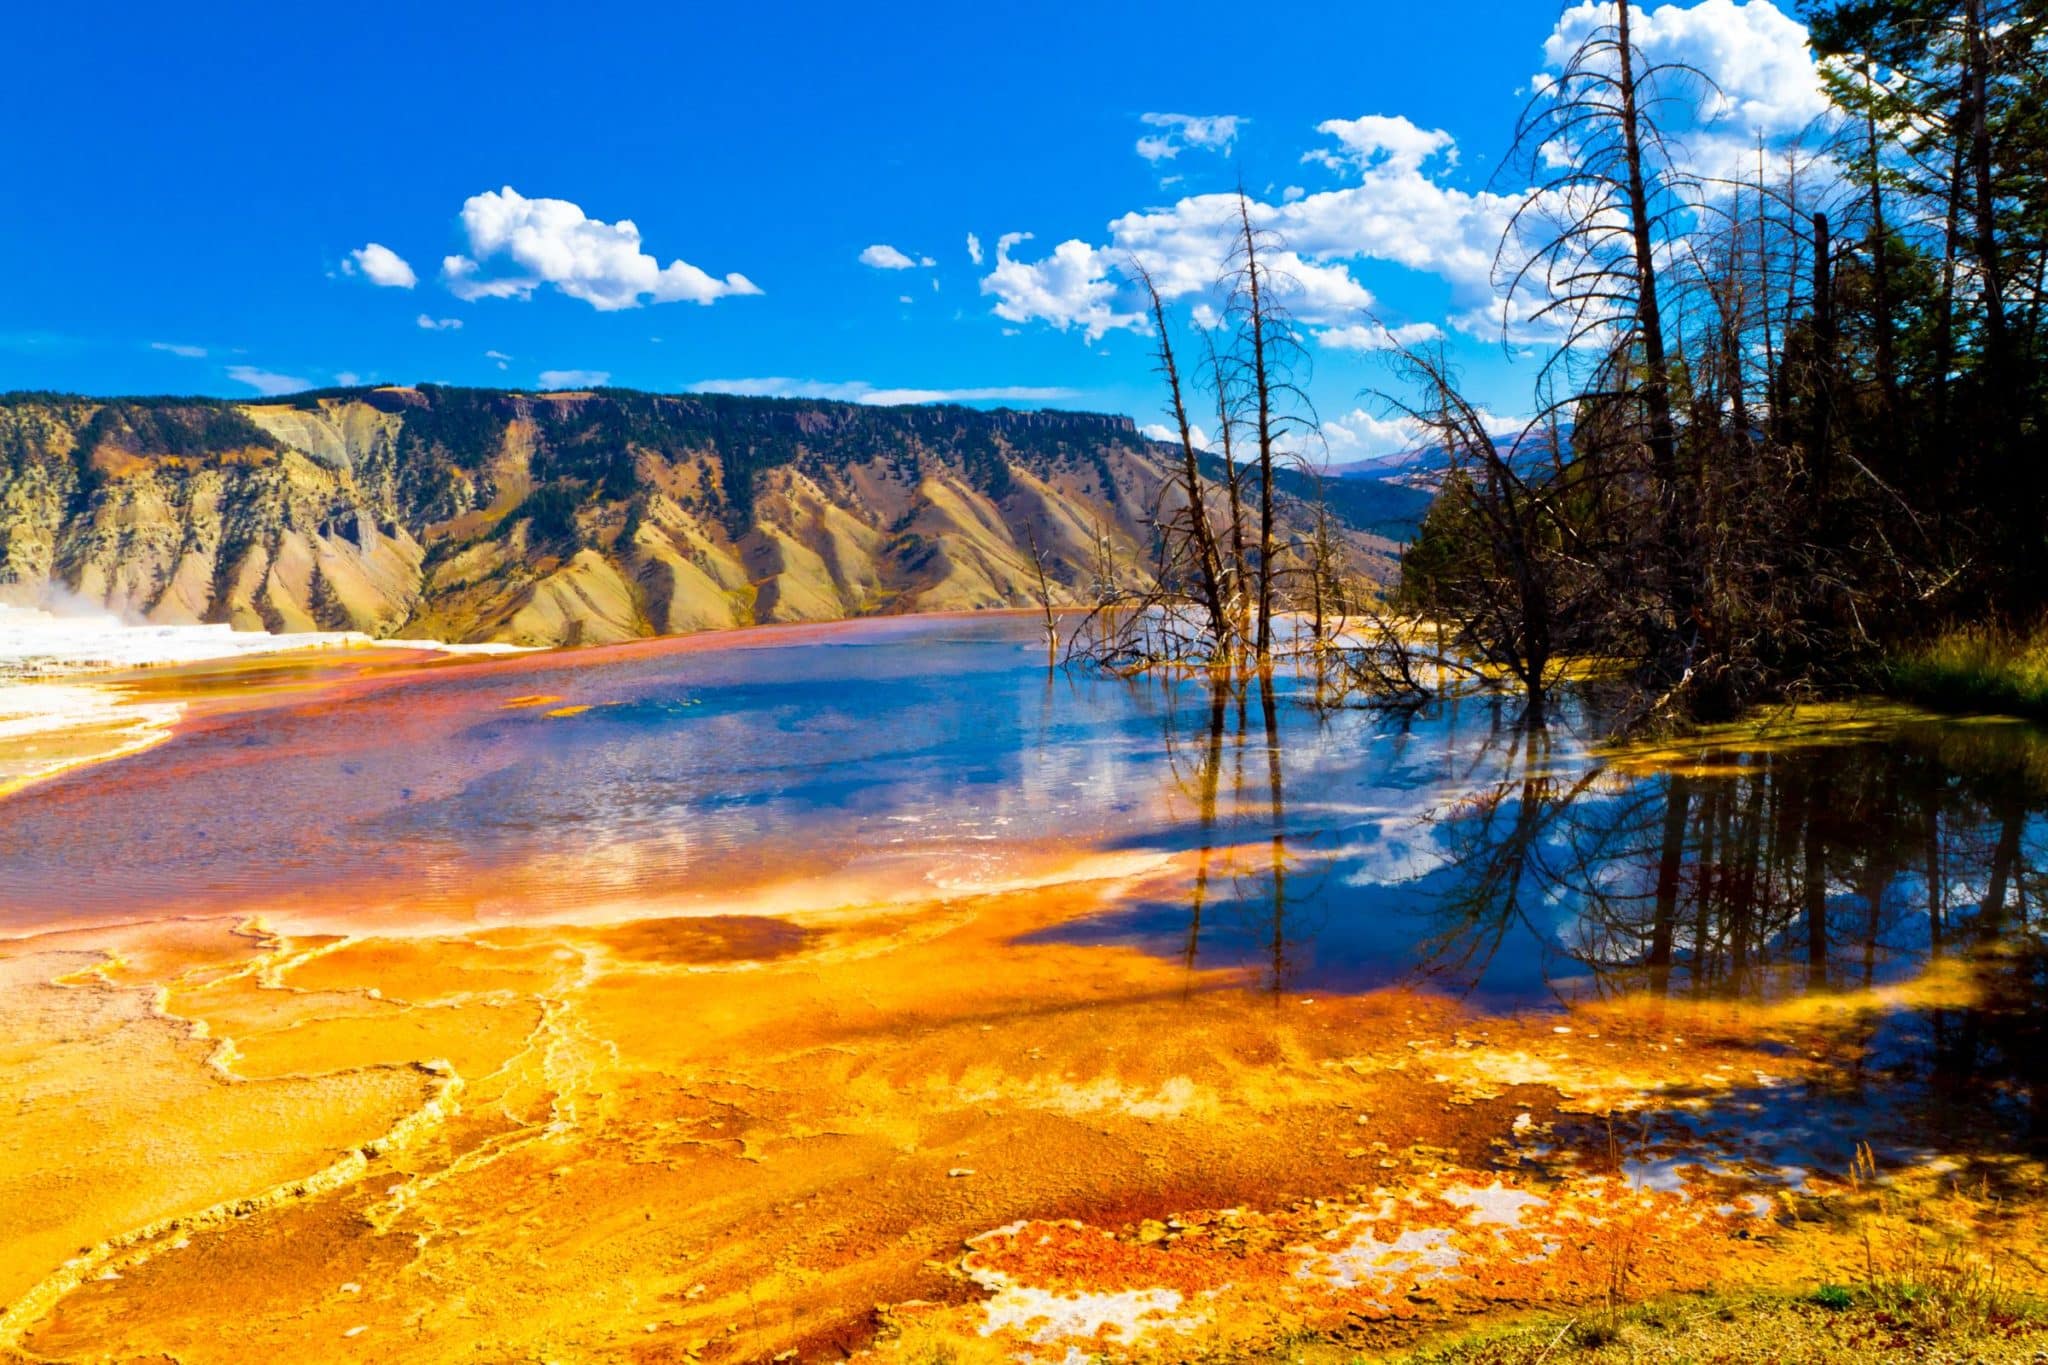 Yellowstone National Park to celebrate 150th anniversary with series of